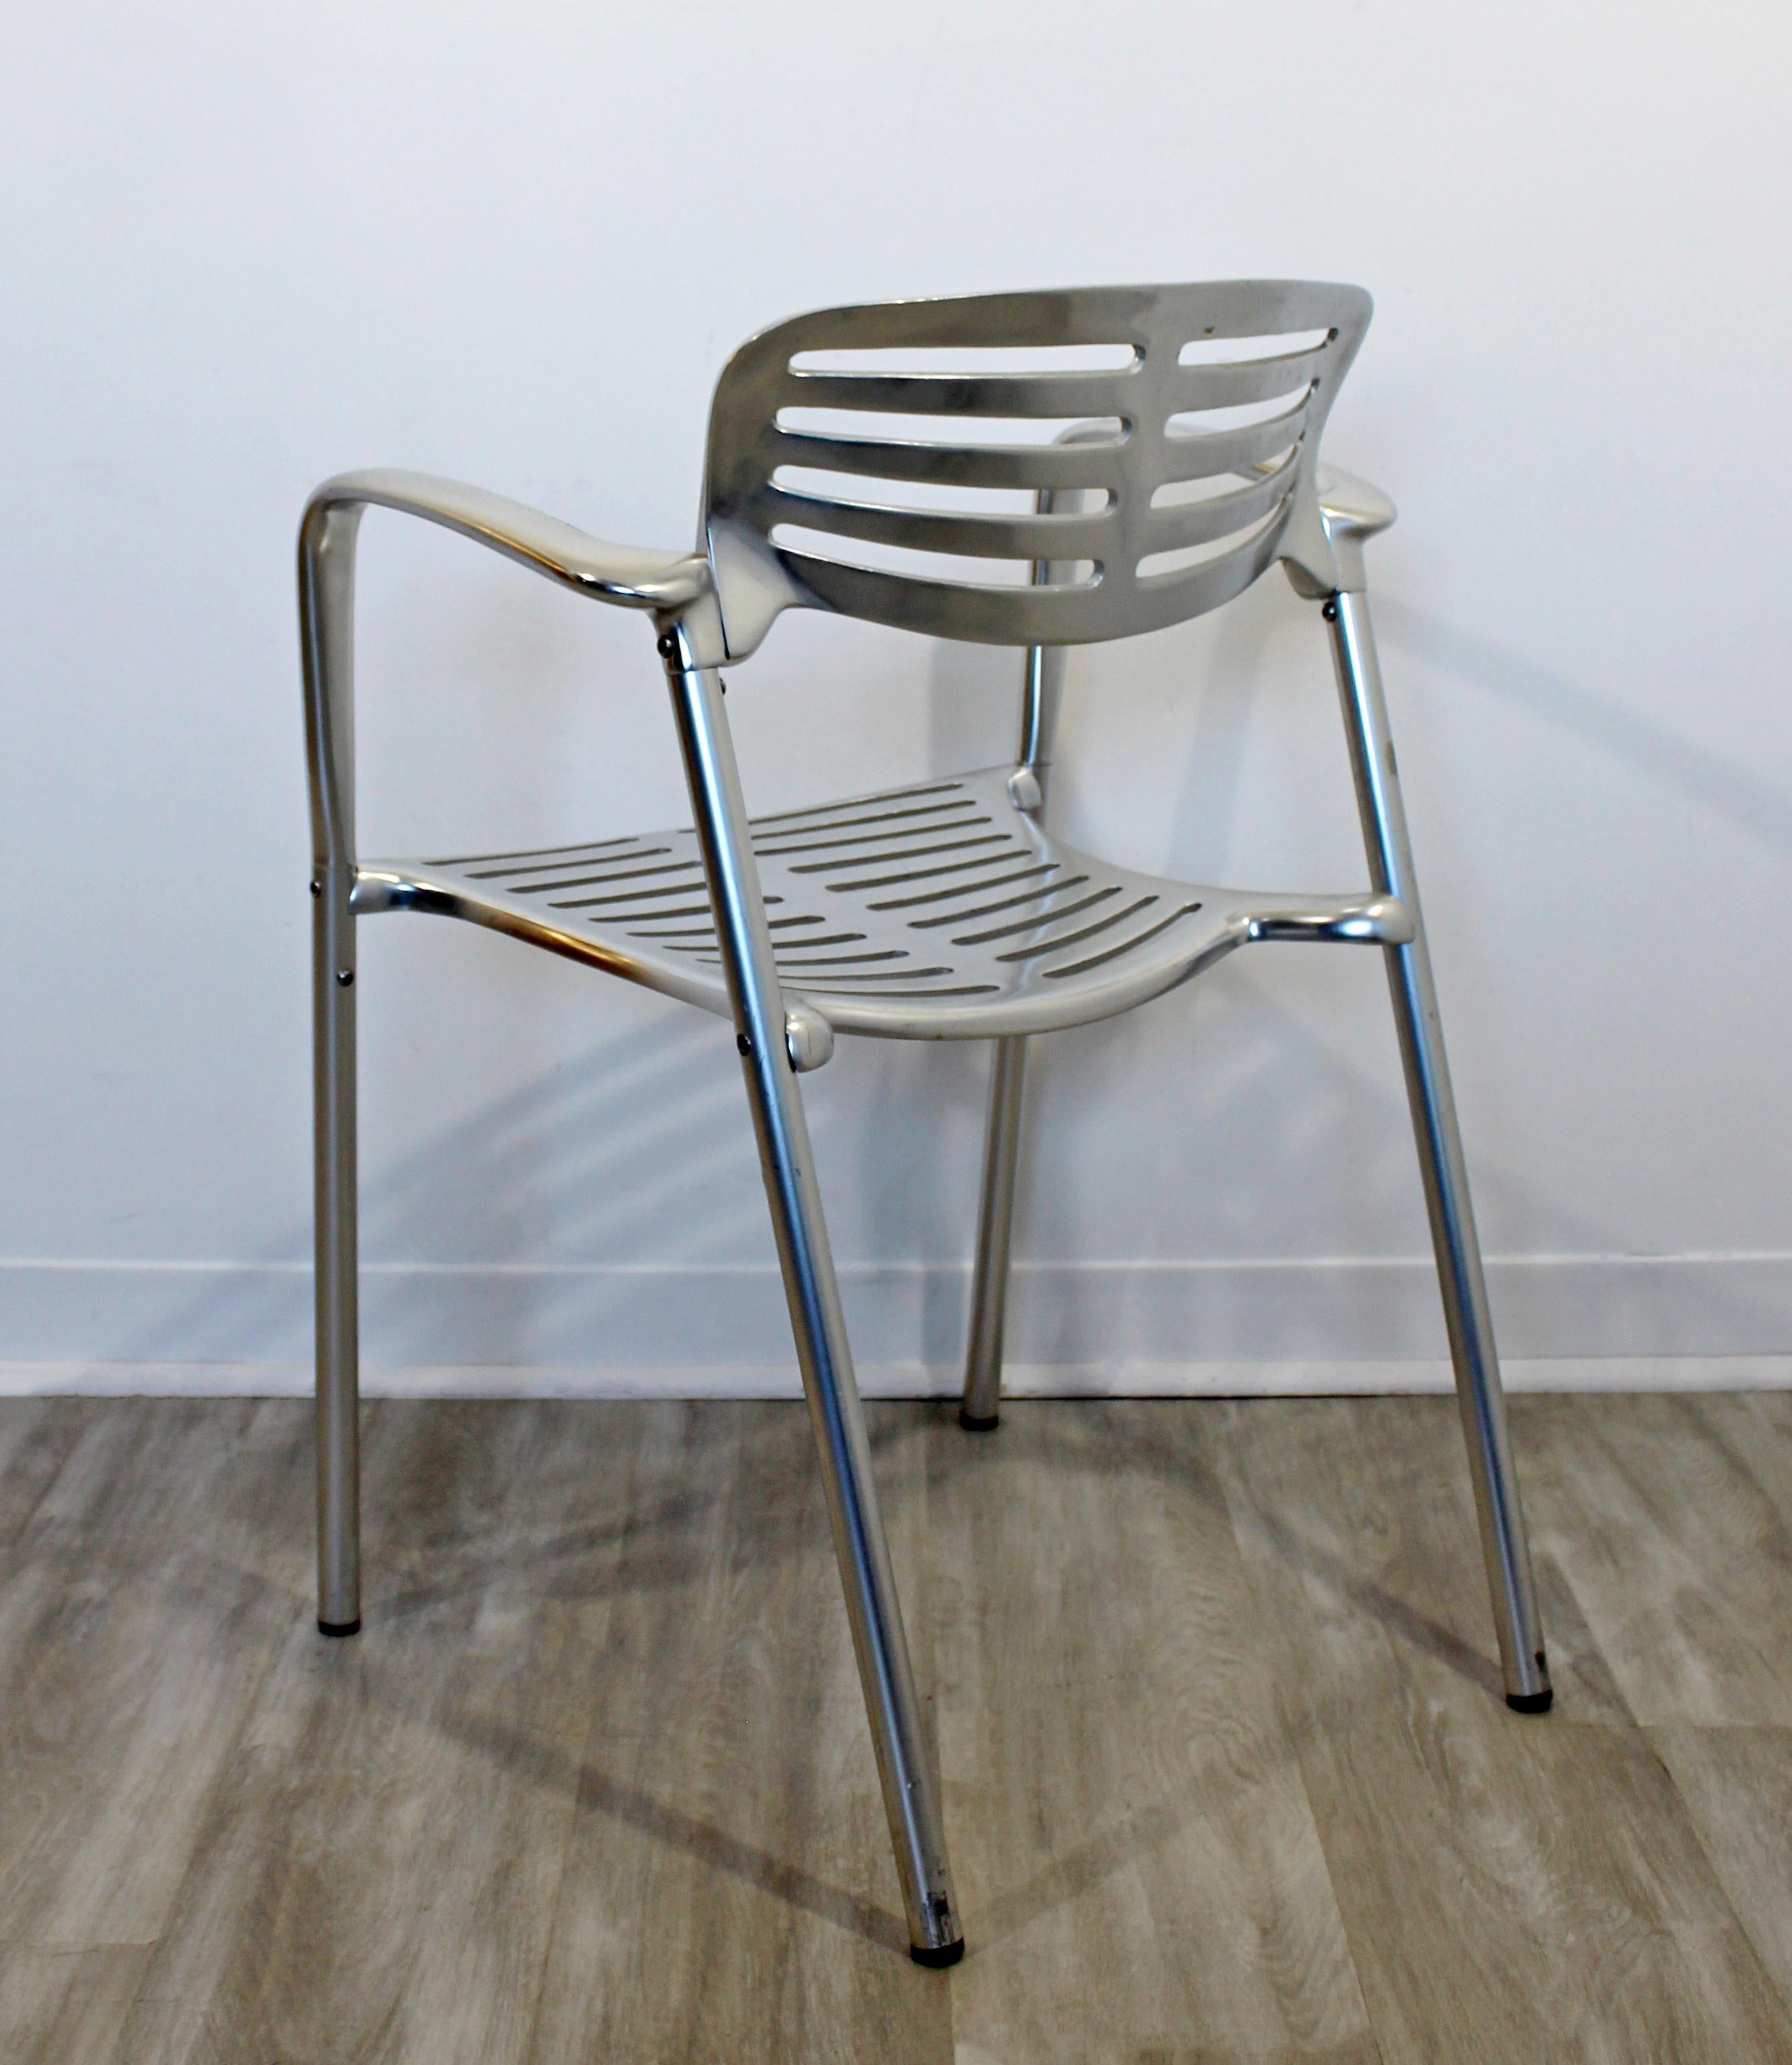 Contemporary Modernist Aluminum Pair of Chairs Toledo by Jorge Pensi Spain 1980s 1